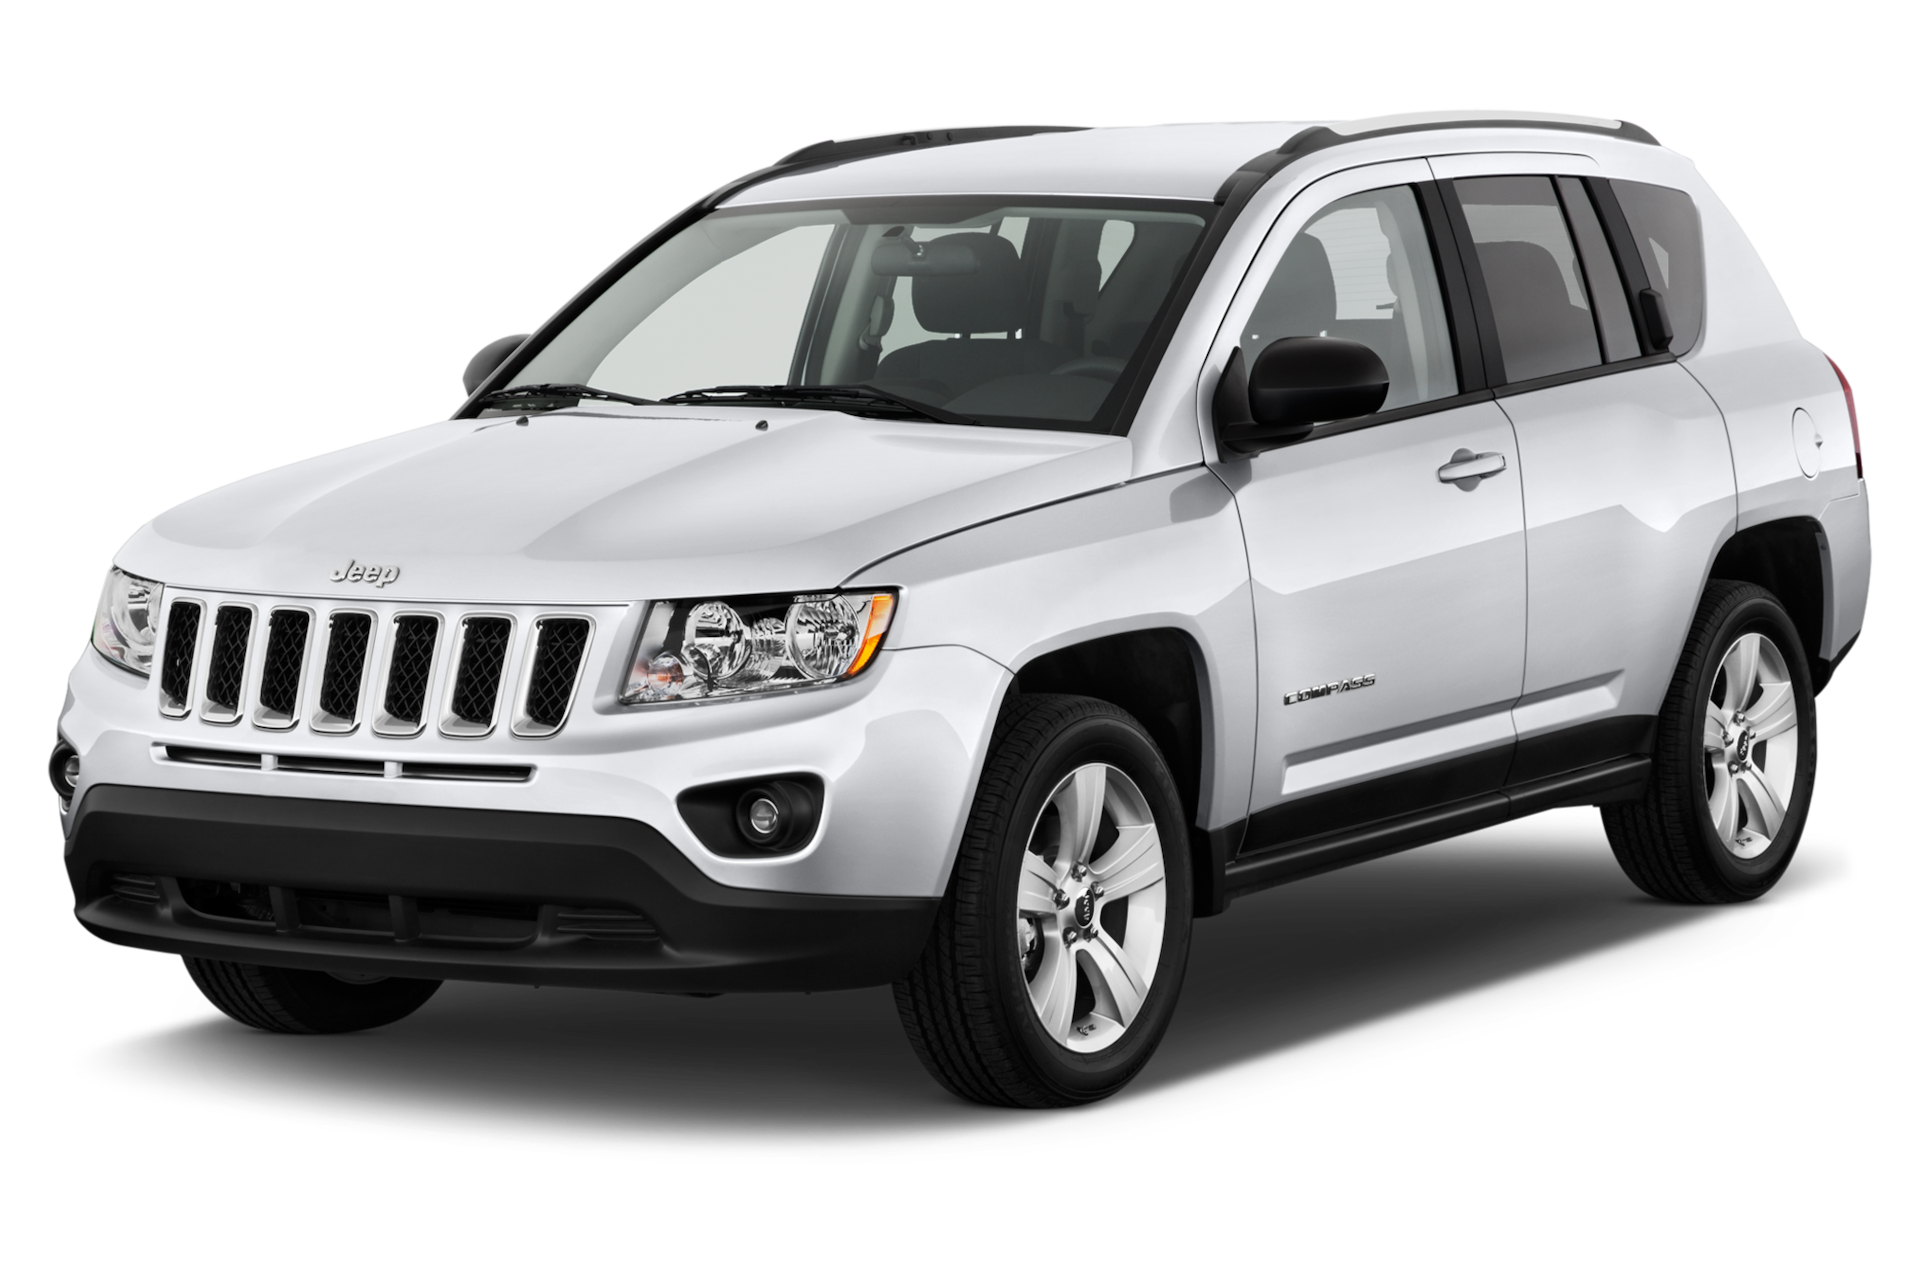 2012 Jeep Compass Prices, Reviews, and Photos - MotorTrend